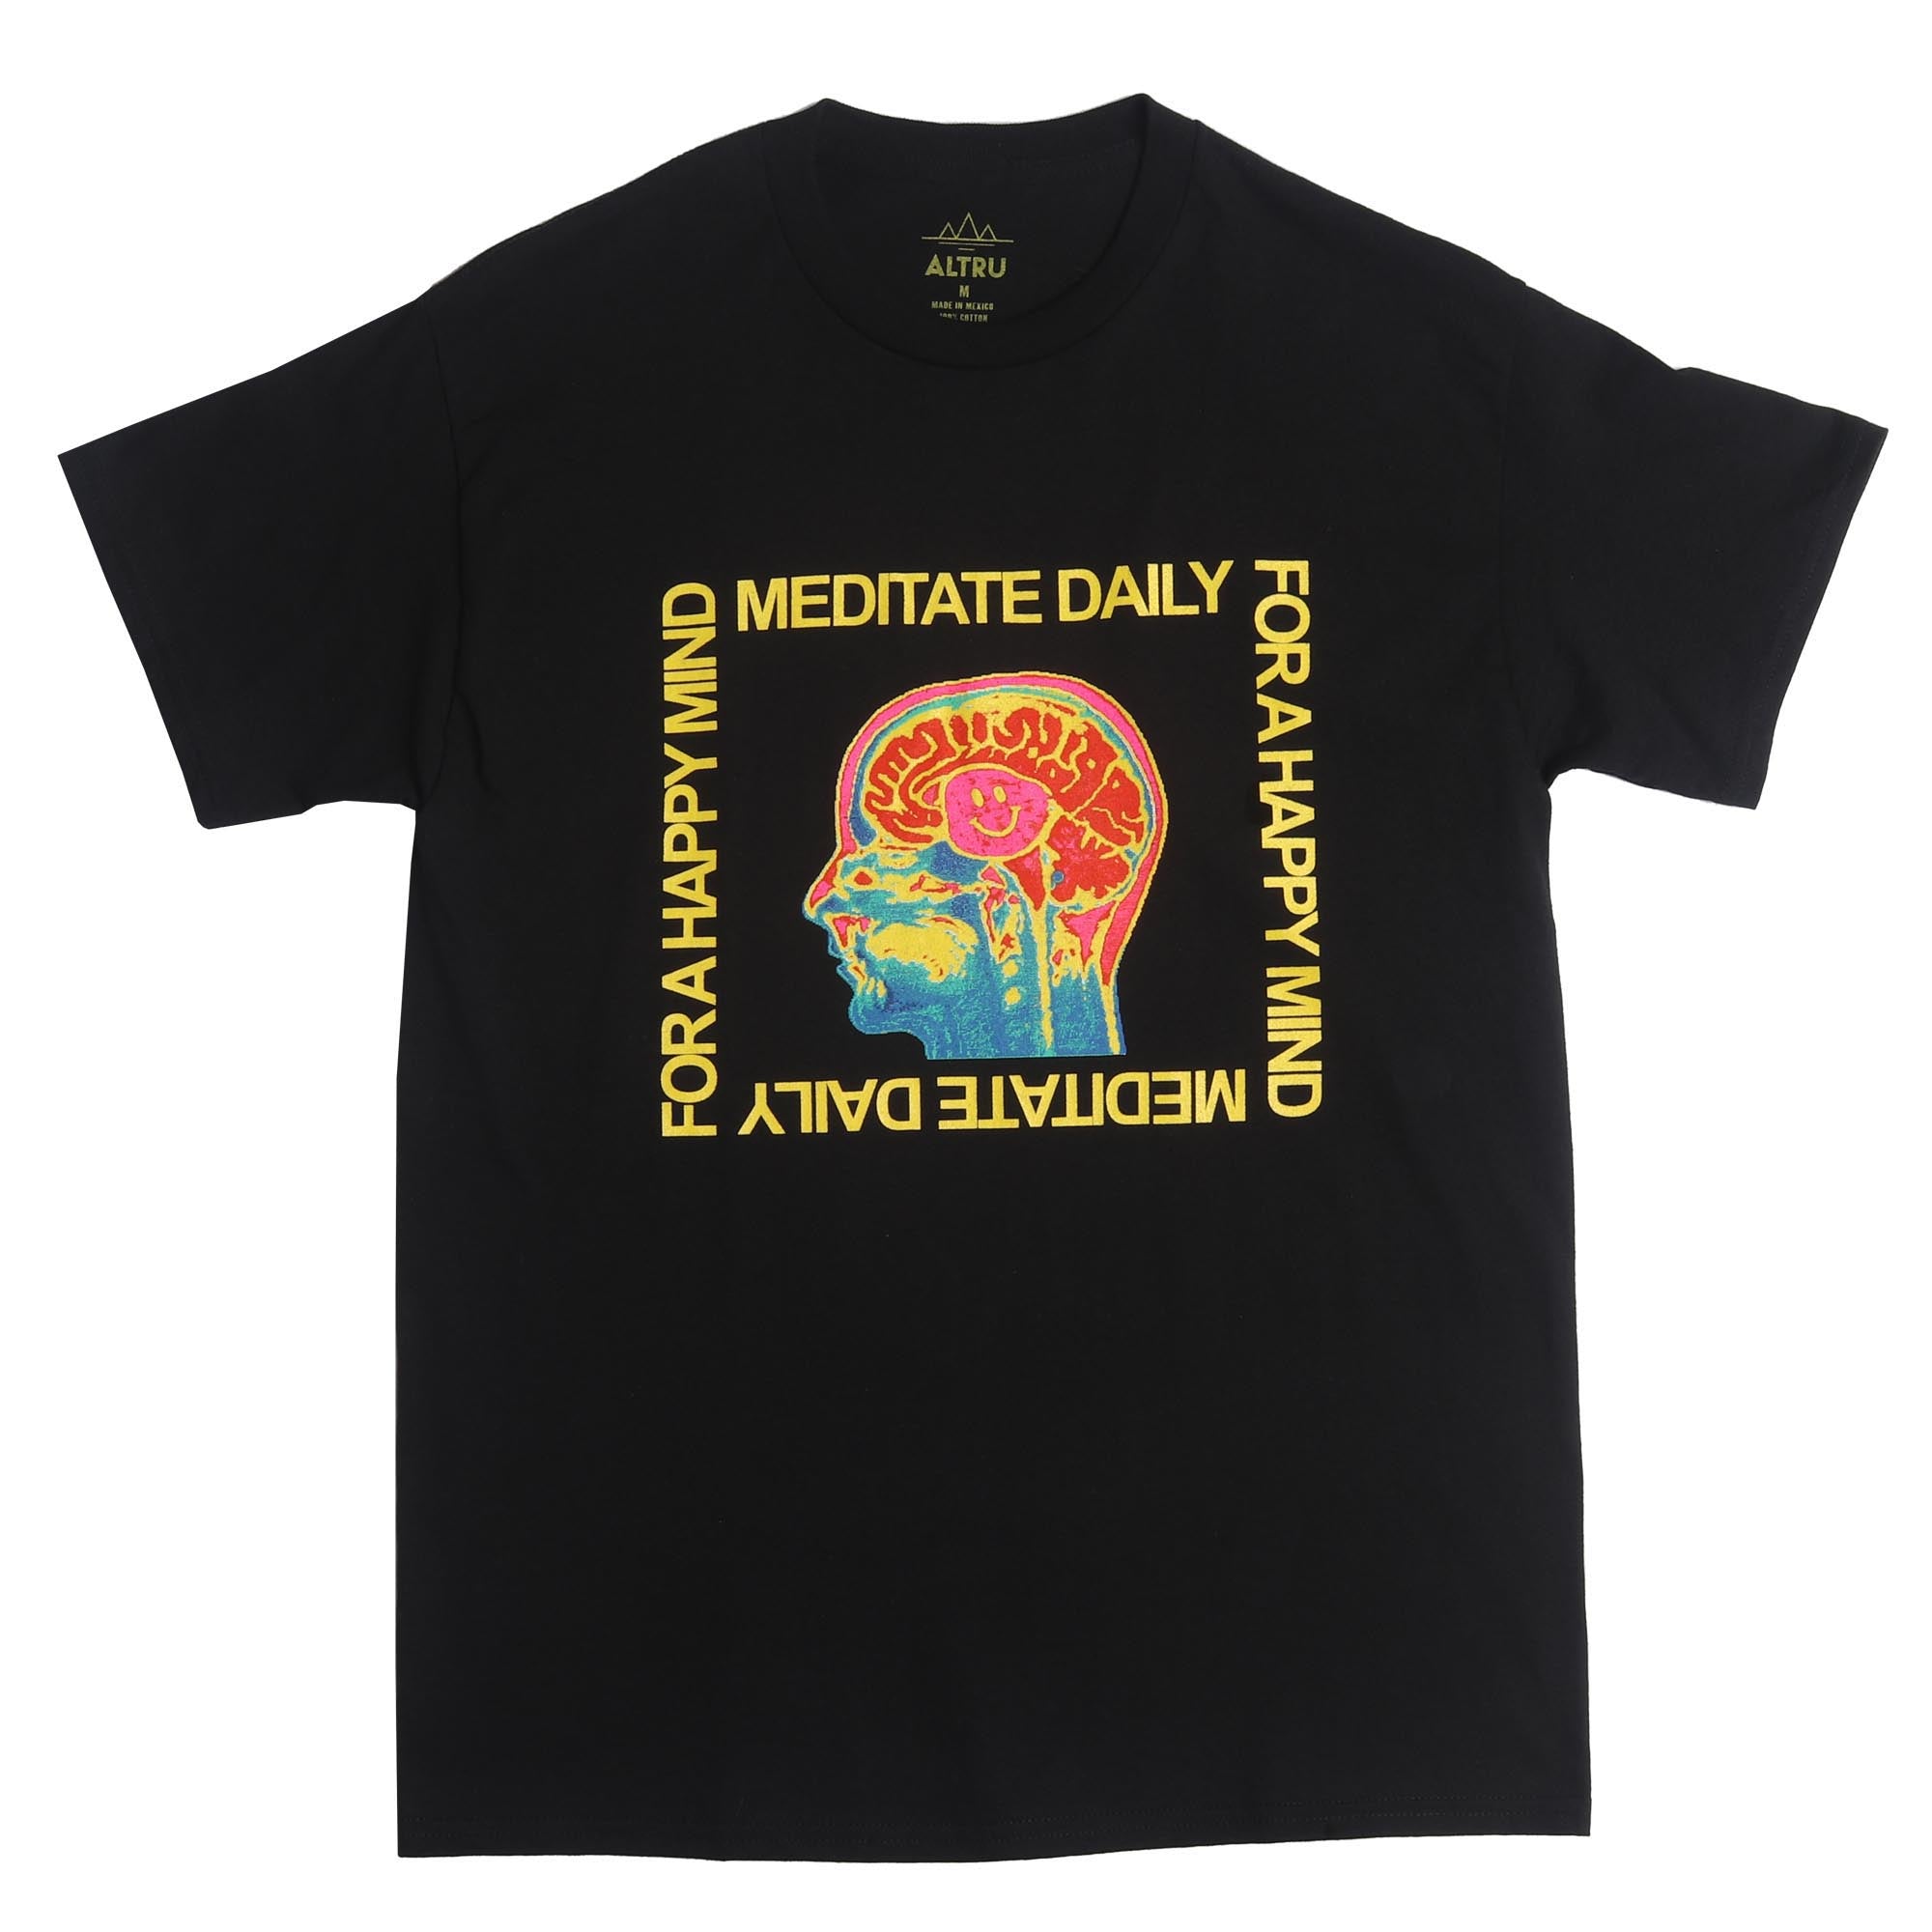 Meditate Daily mens black graphic tee by altru apparel front